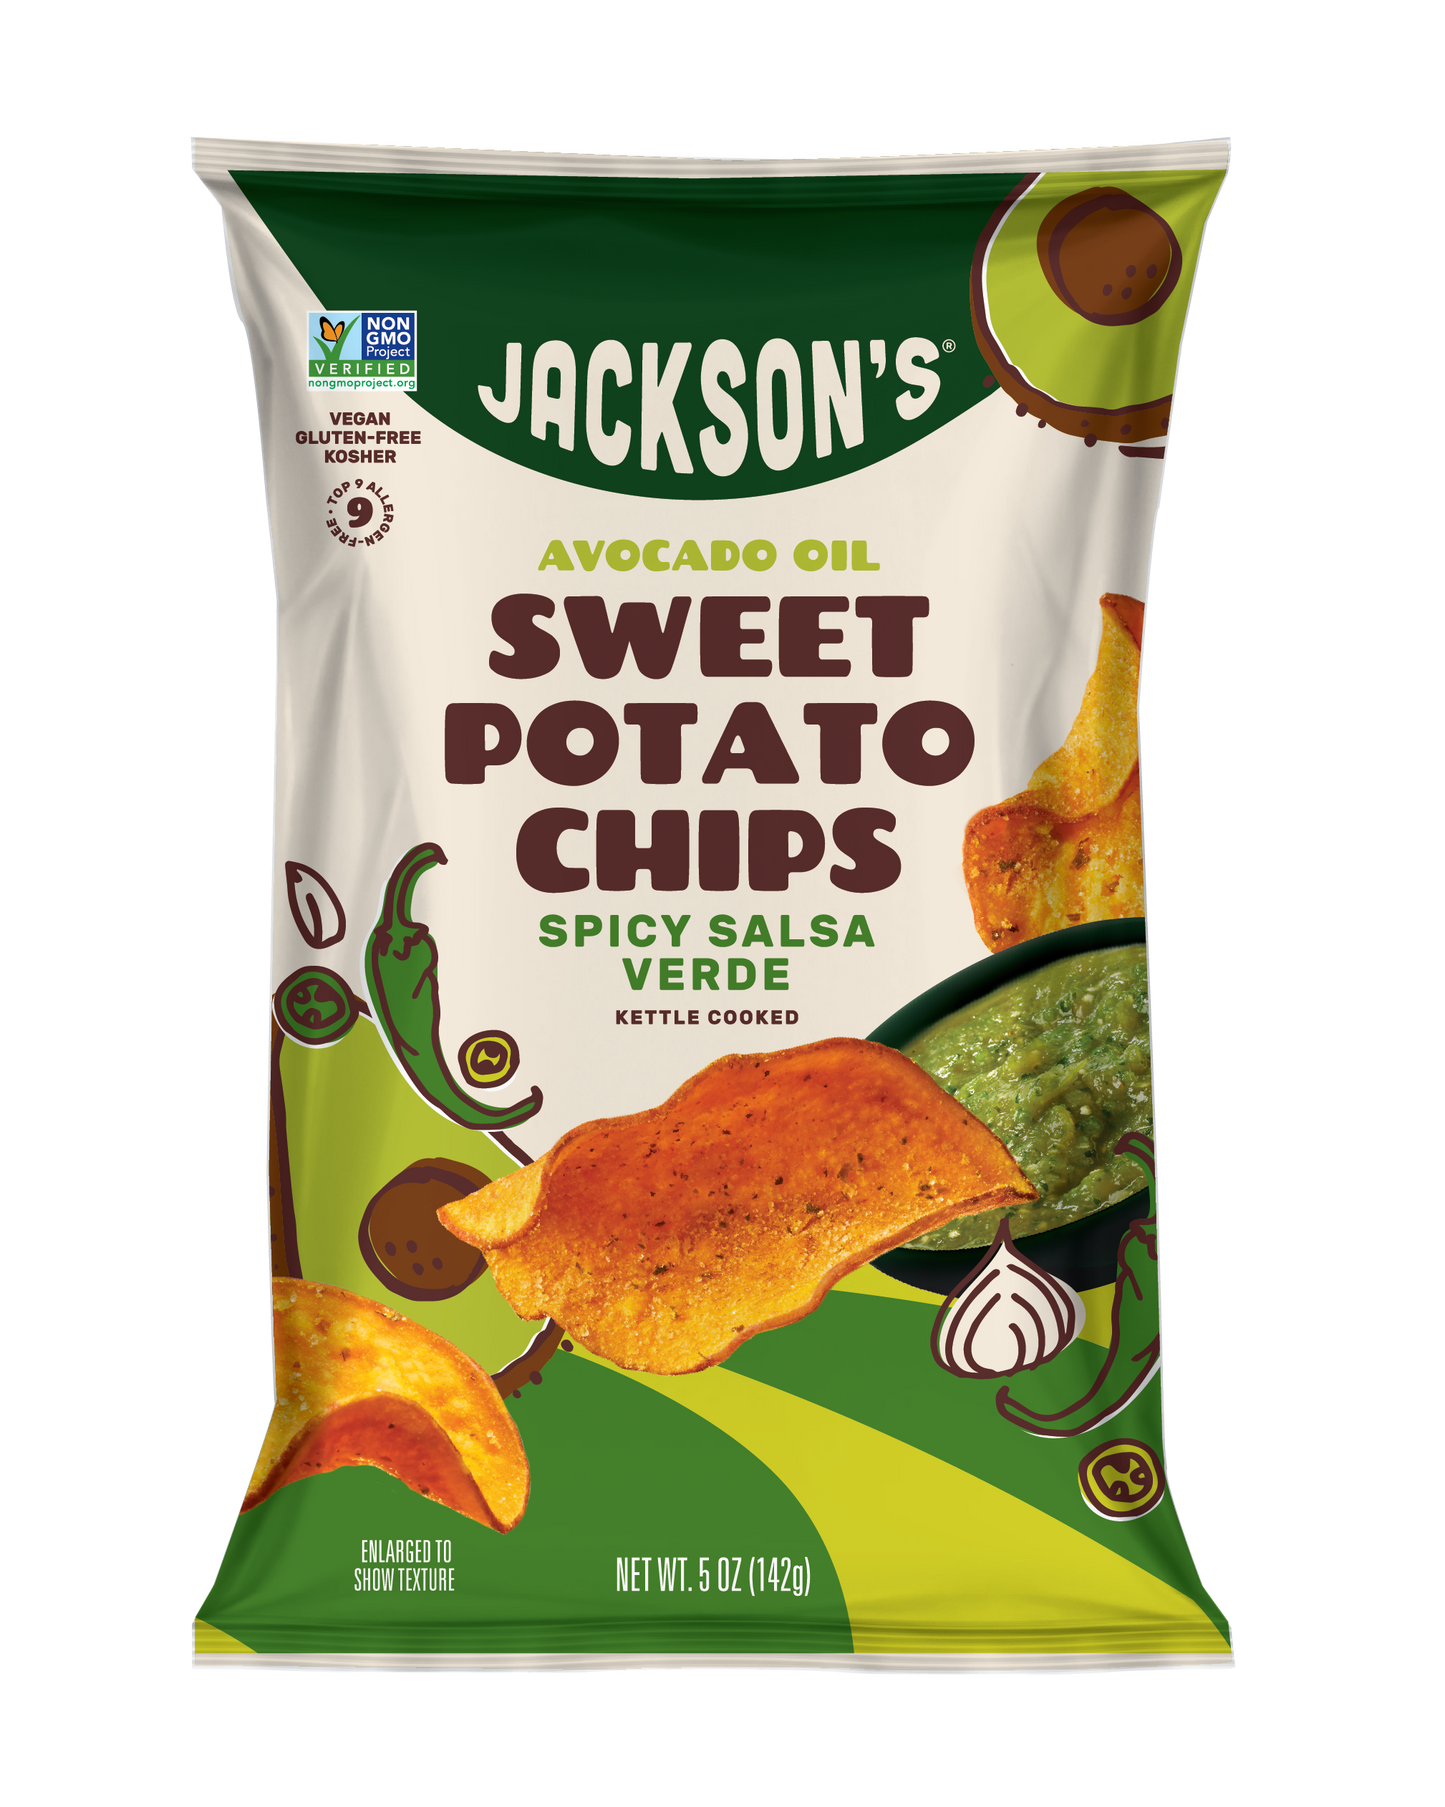 Spicy Tomatillo Sweet Potato Chips with Avocado Oil by Jackson's